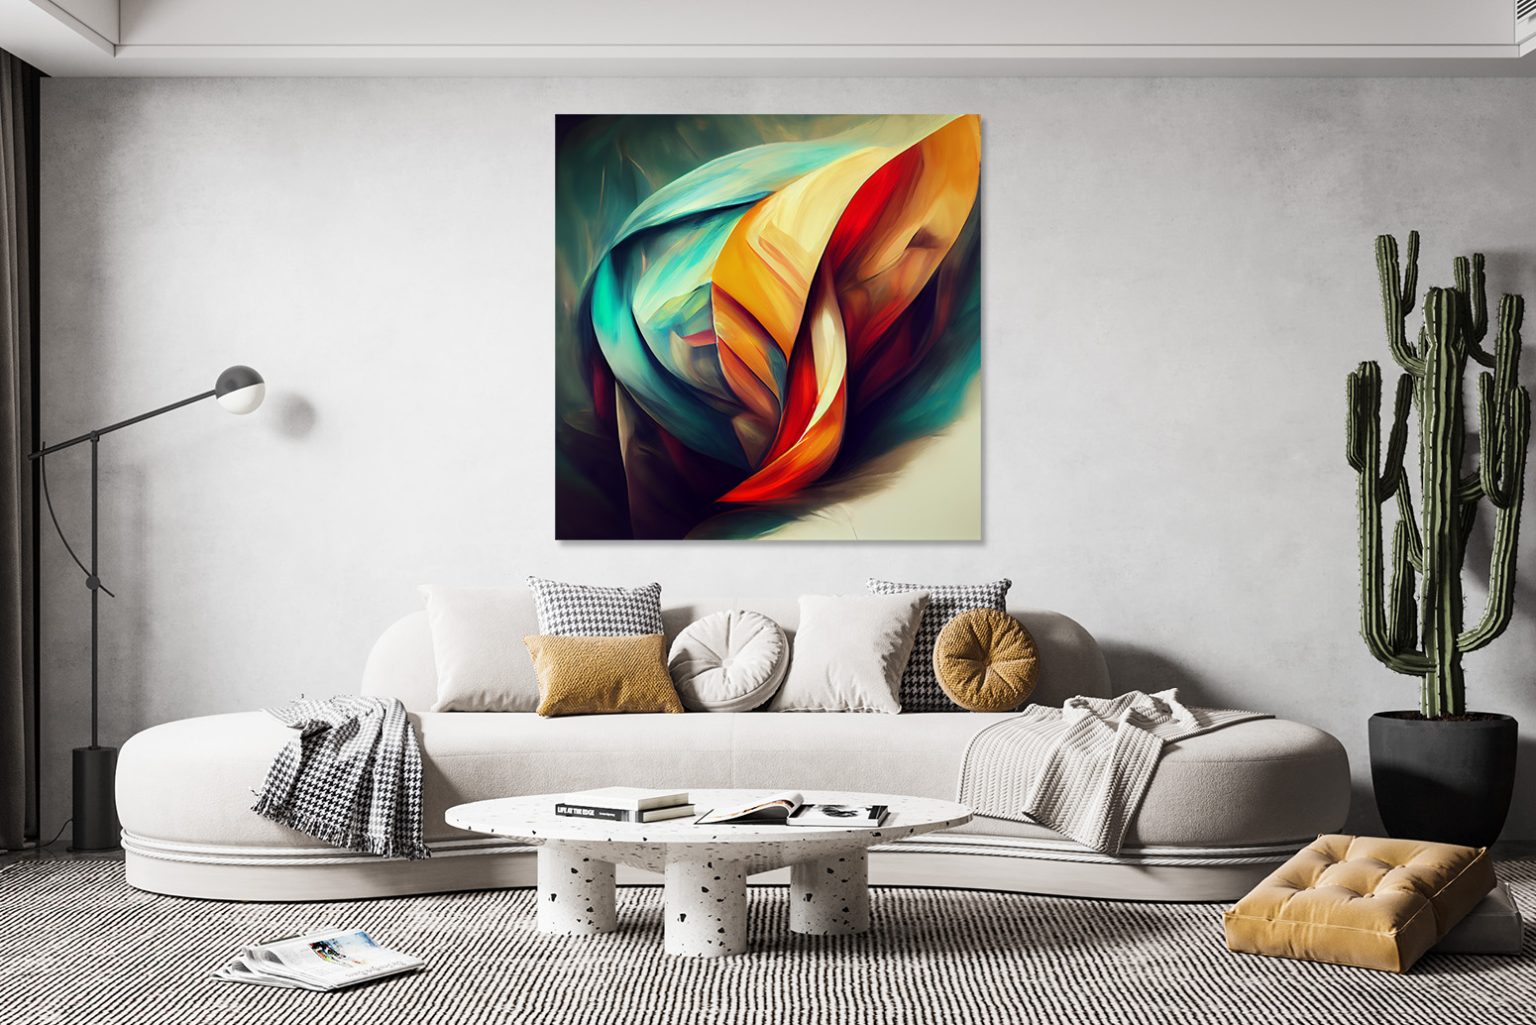 Superior Quality Printed Wall Art Canvas: Elevate Your Decor